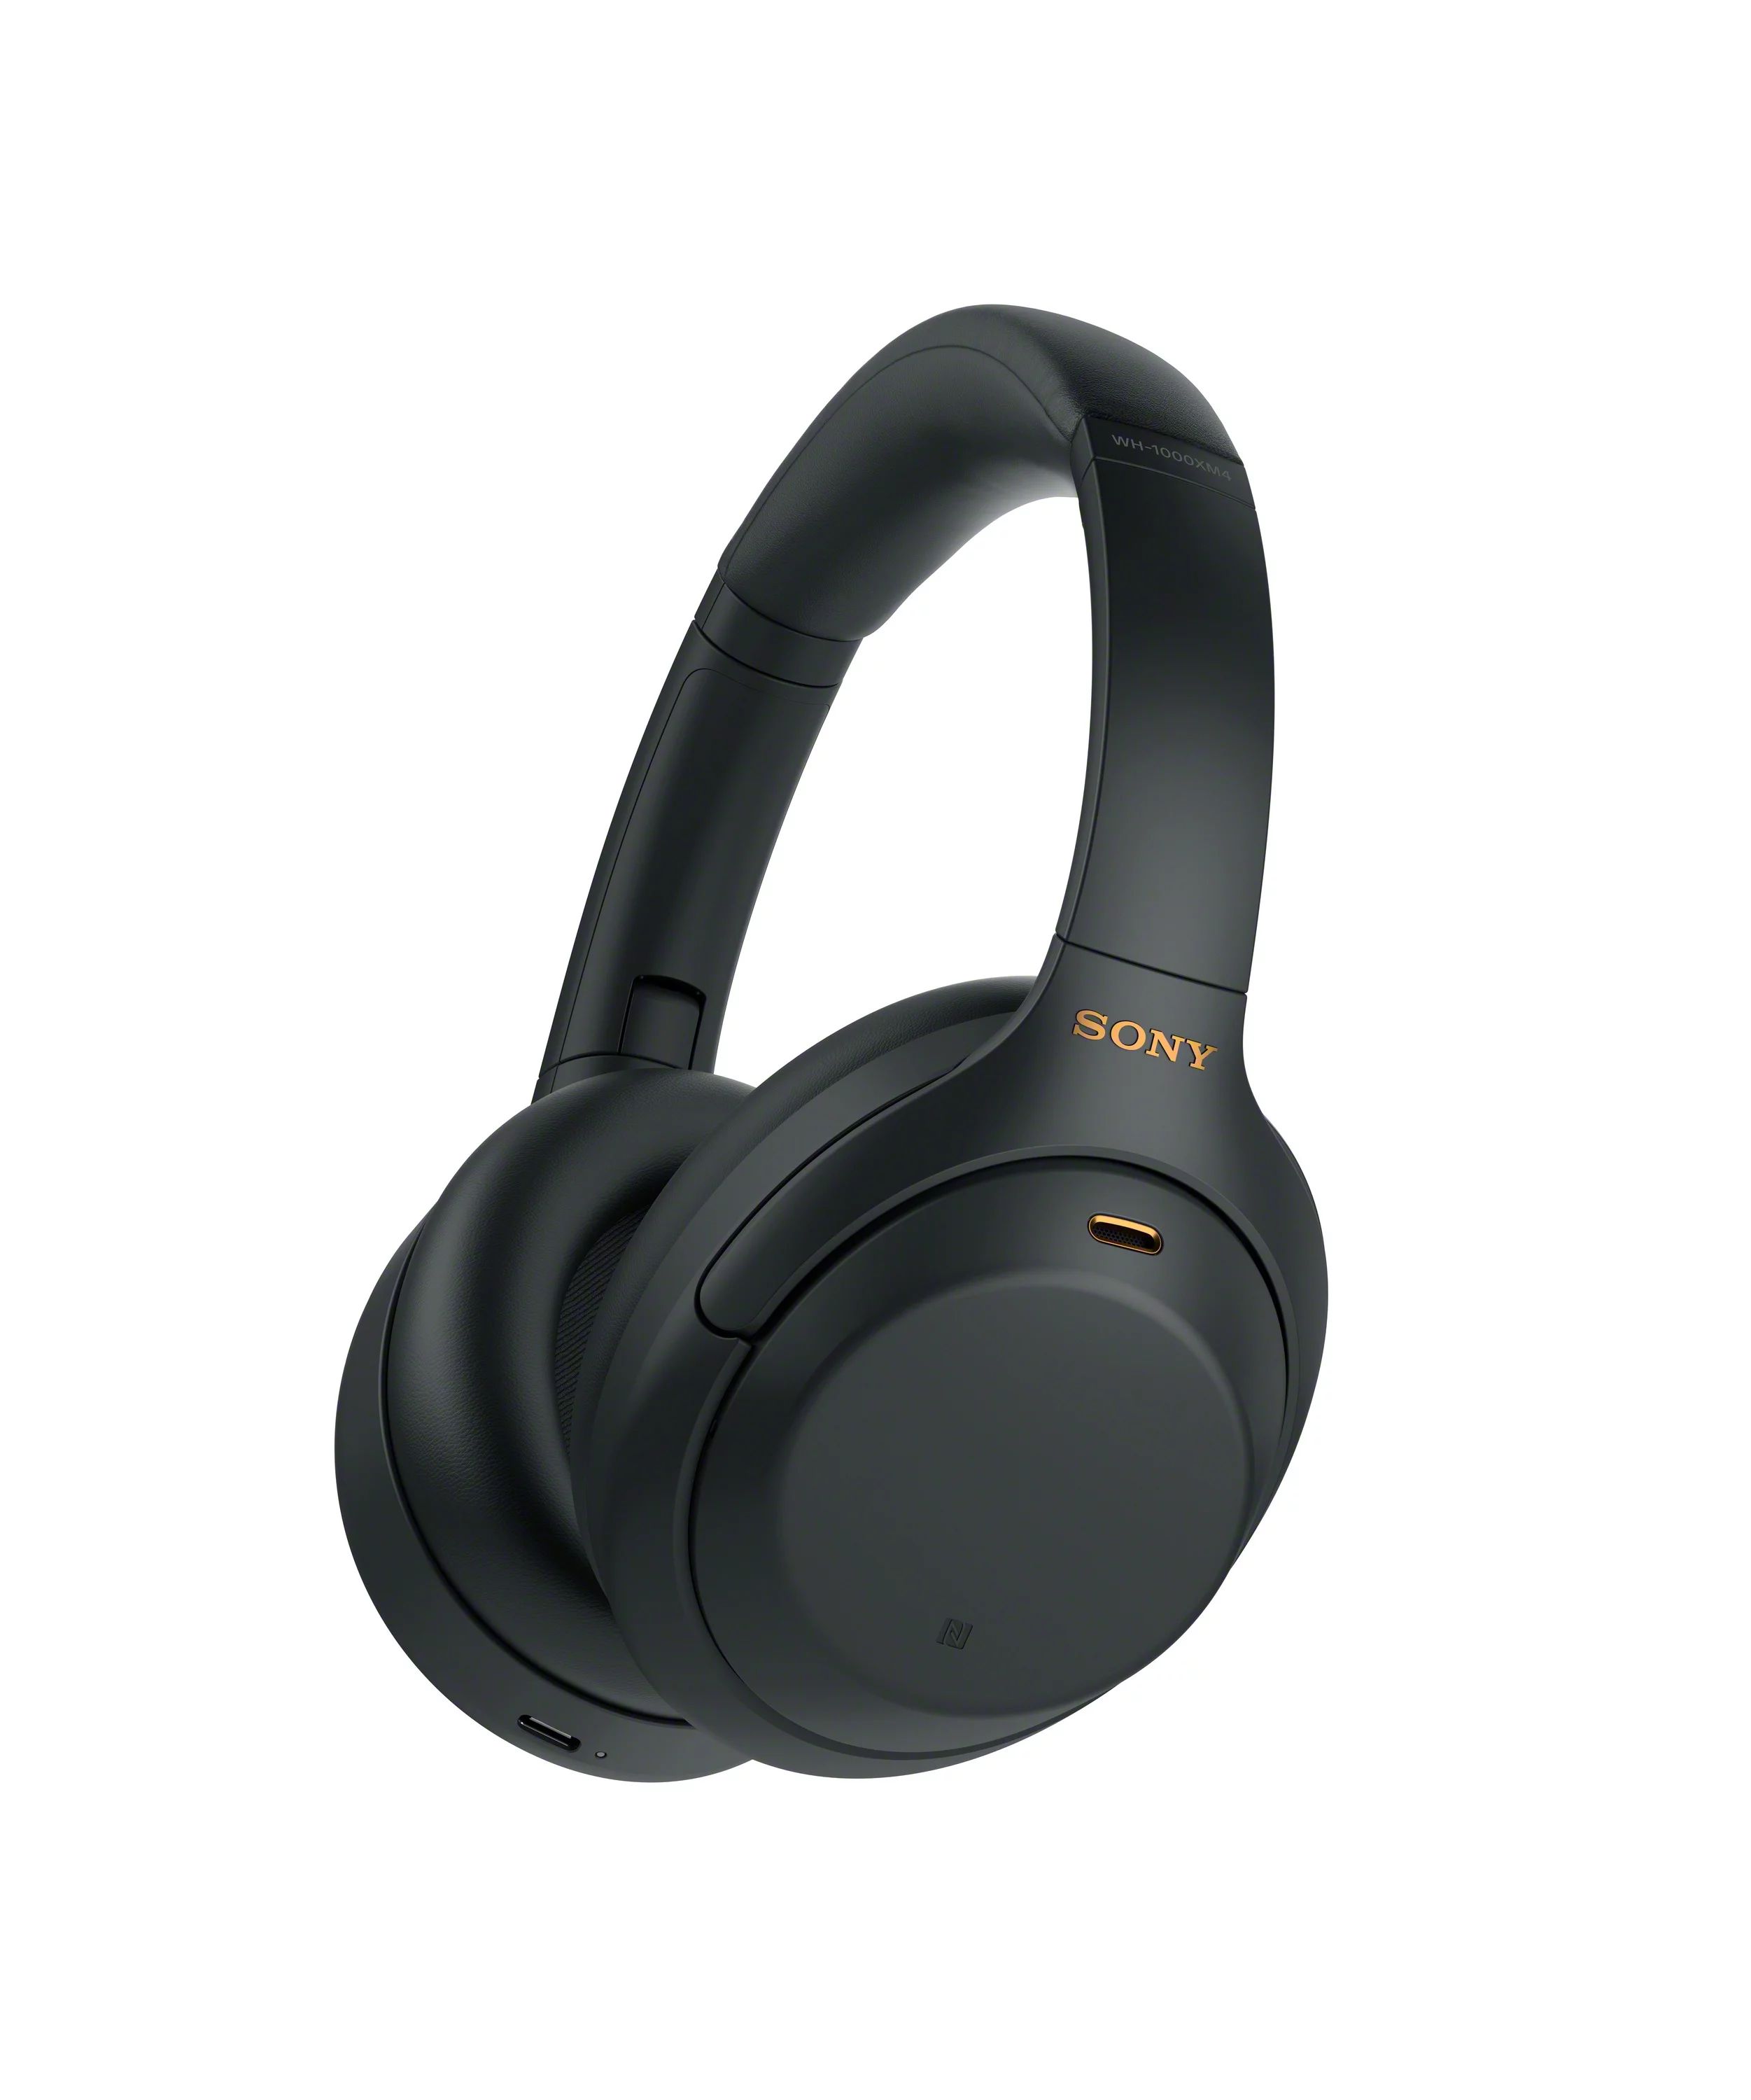 Sony WH-1000XM4 Wireless Noise Canceling Over-the-Ear Headphones with Google Assistant - Black | Walmart (US)